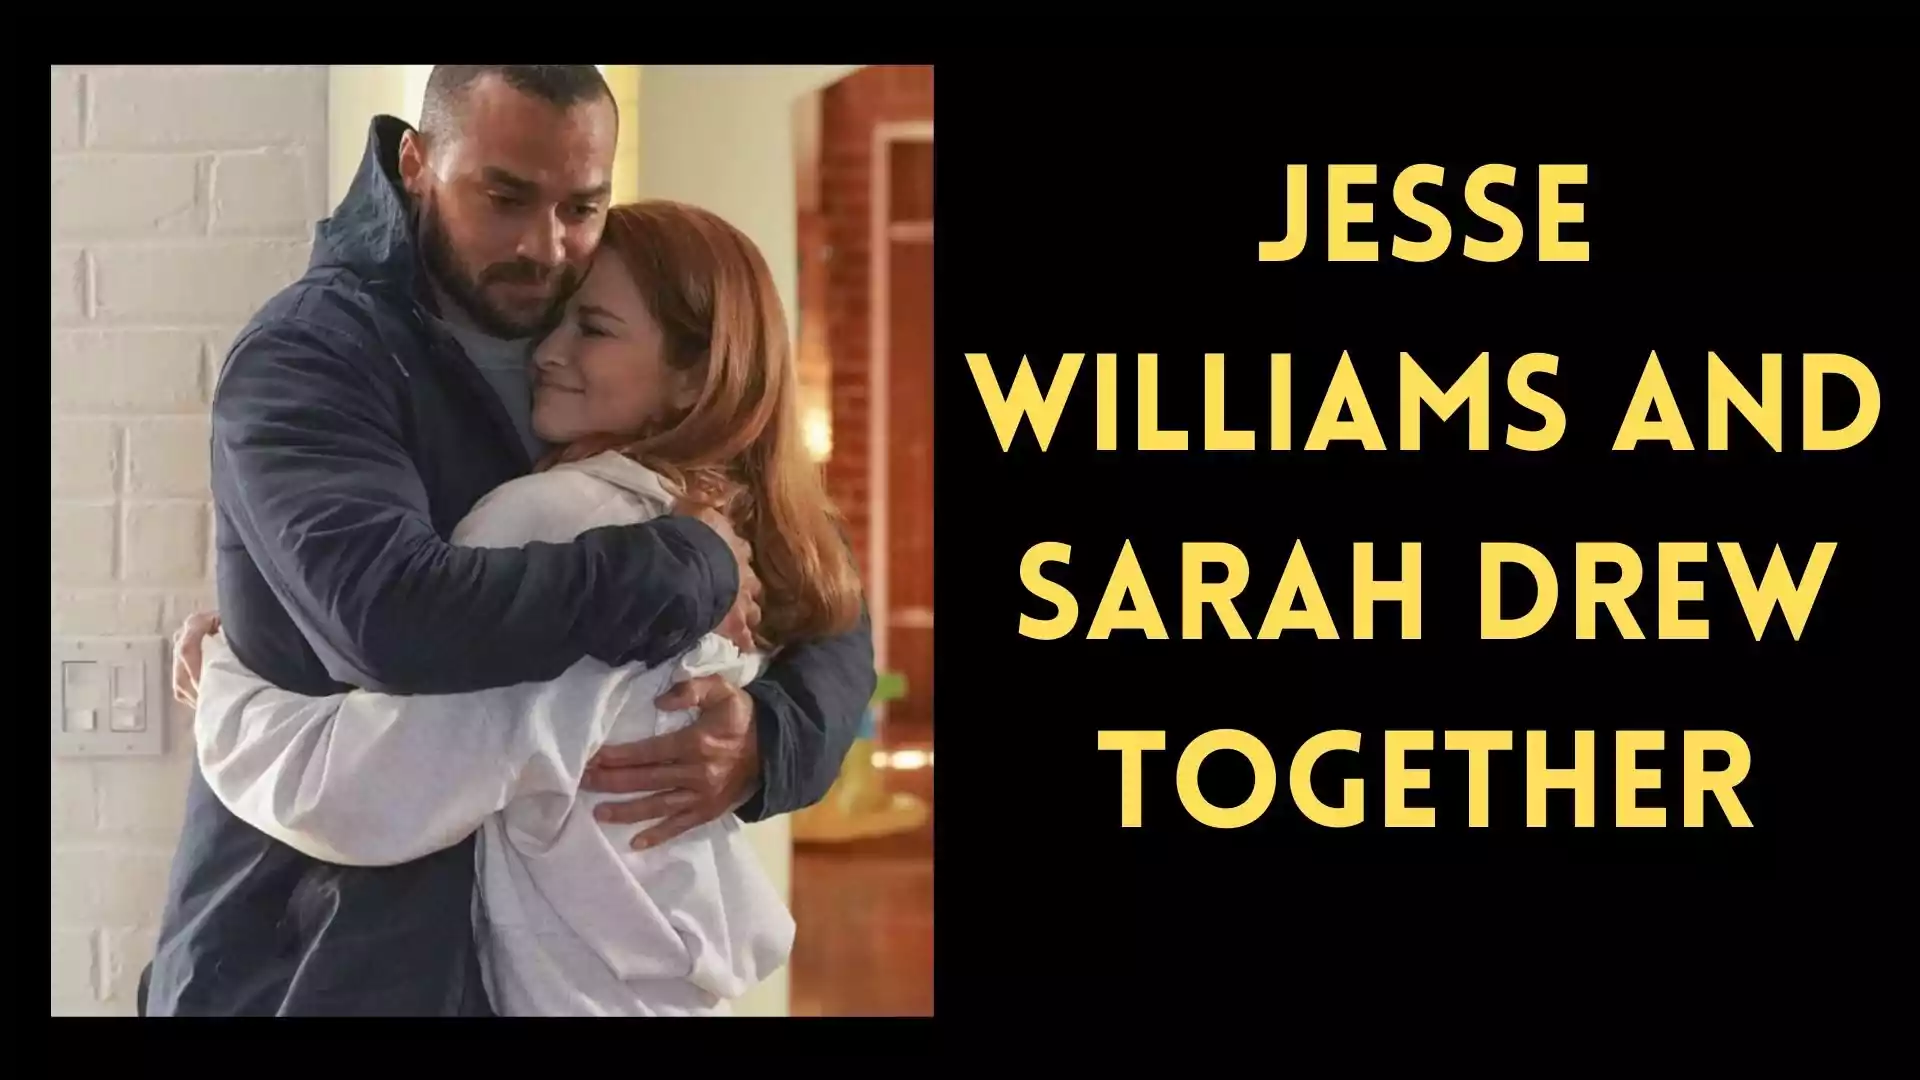 Jesse Williams and Sarah Drew Together in Grey's Anatomy Season Finale 18. grey's anatomy season 18 release date. season 18 start date